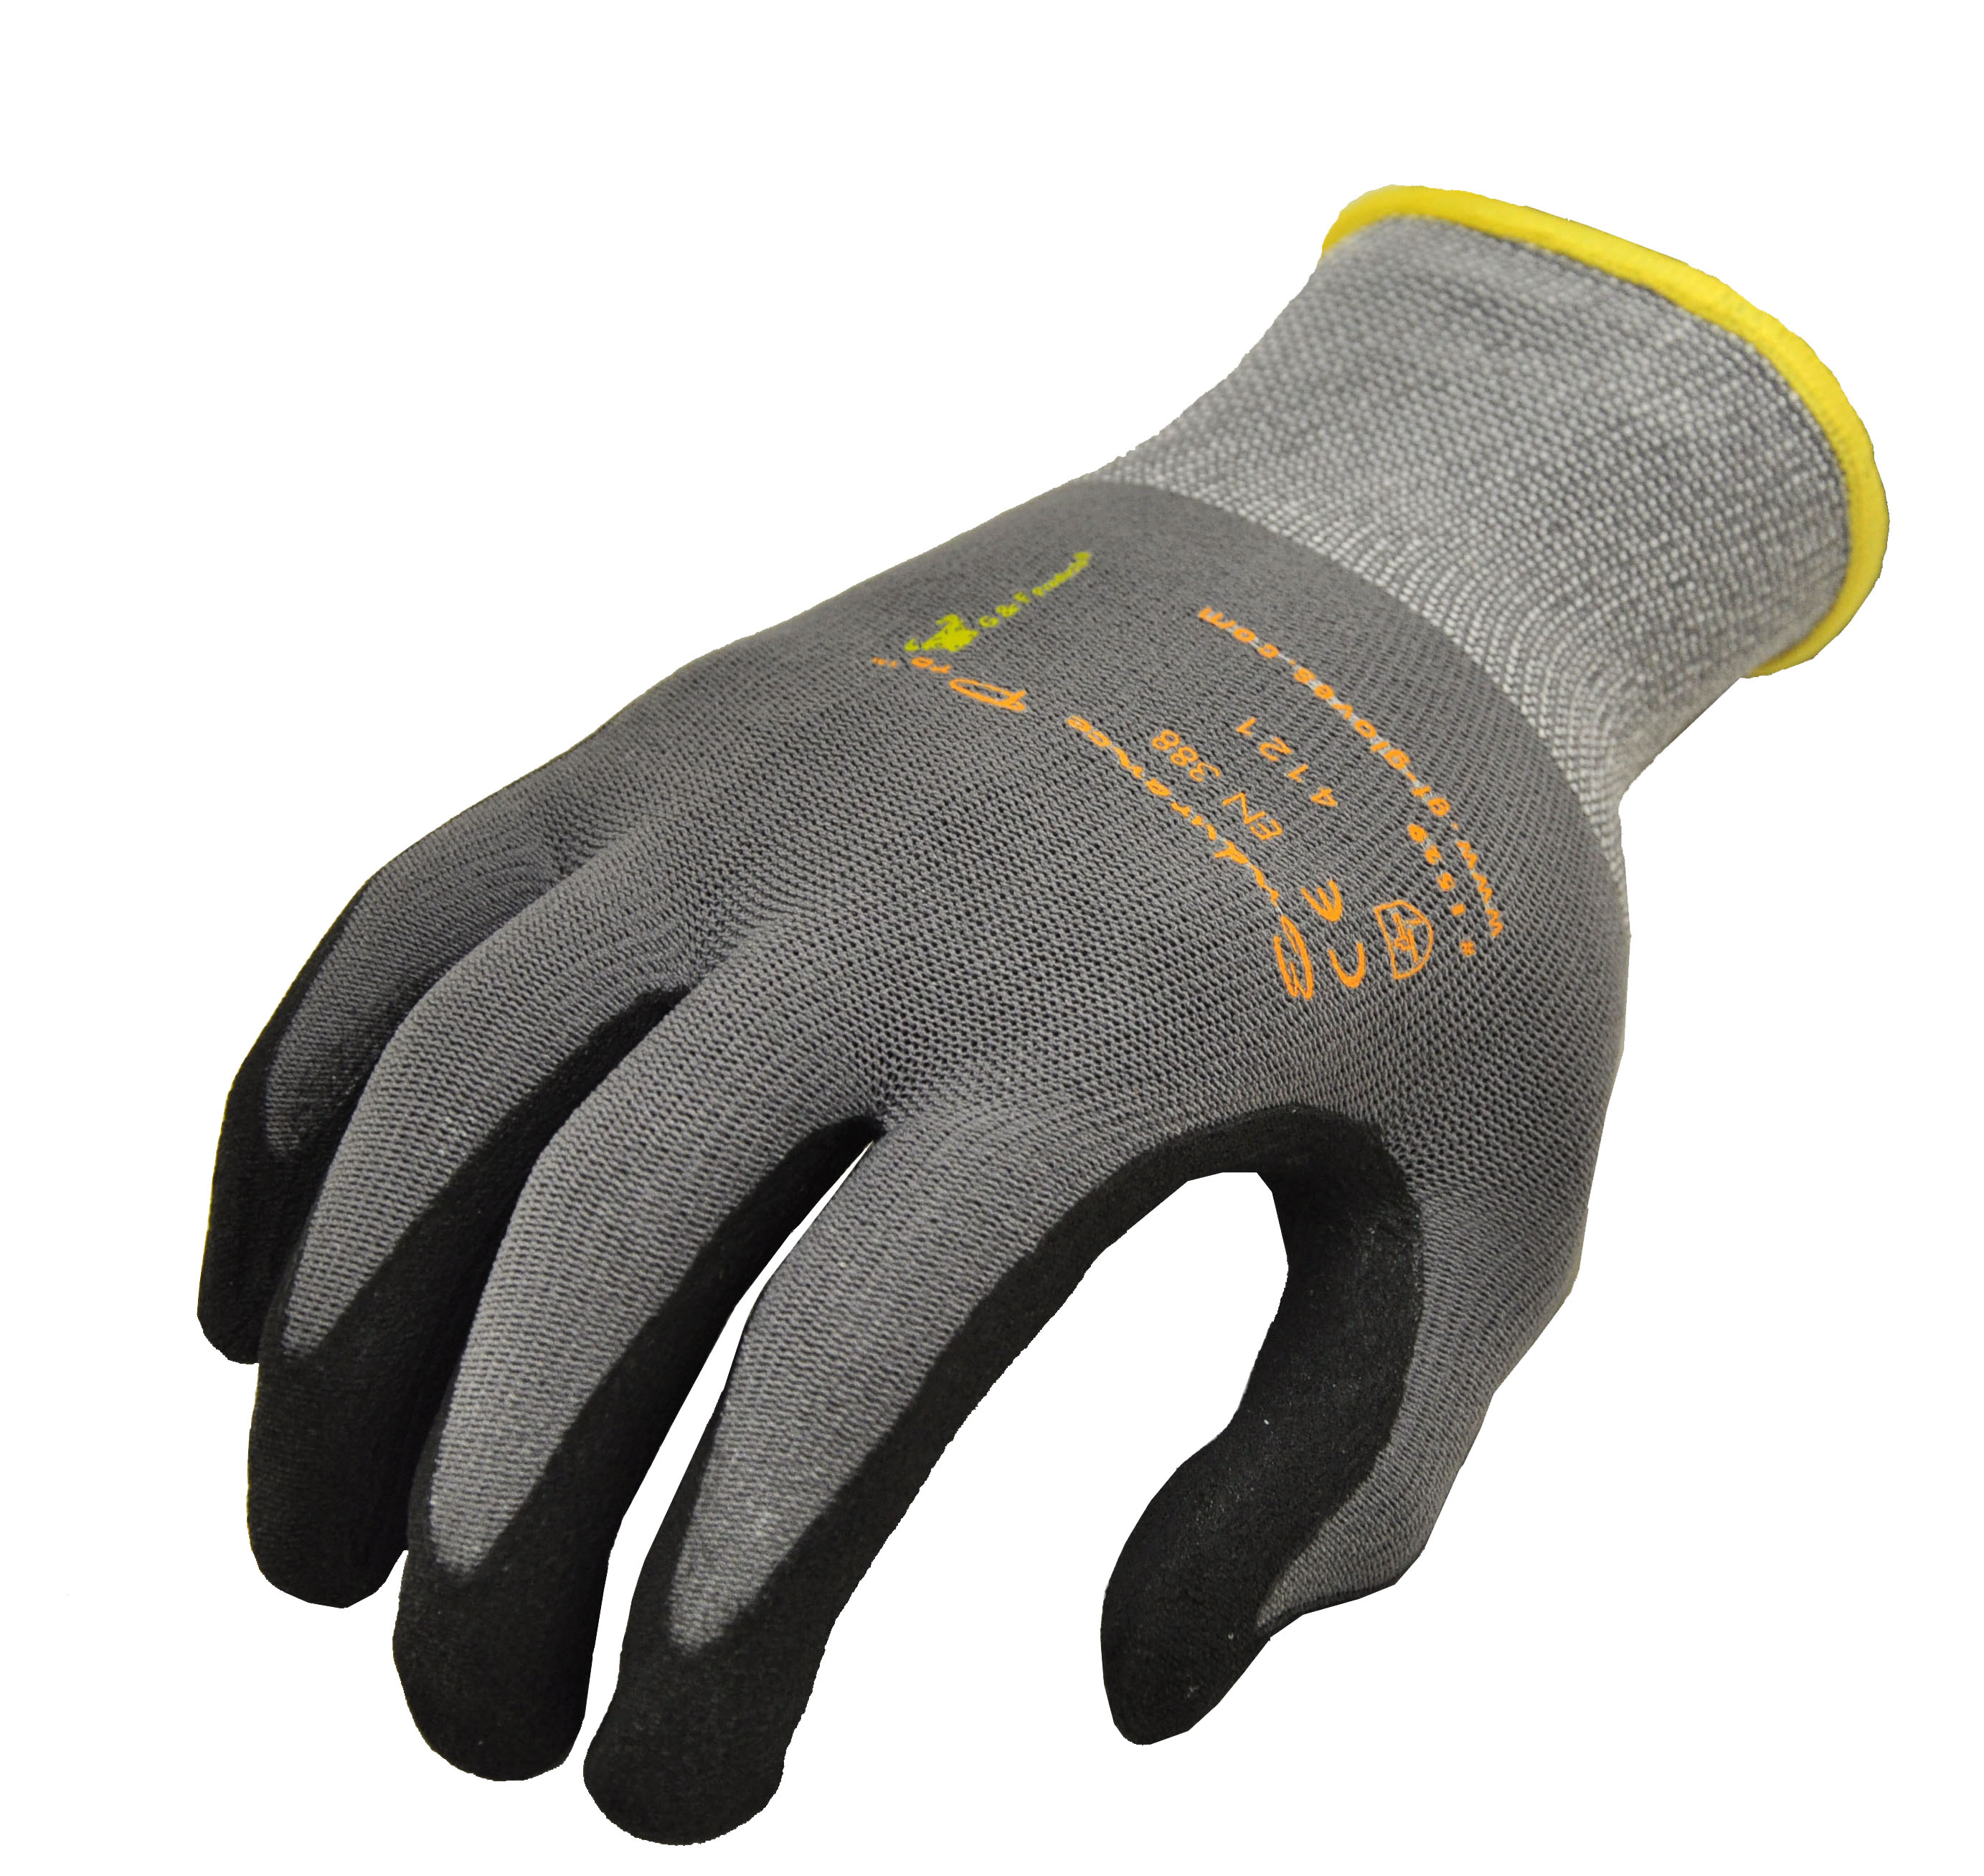 G & F Products Knit Nylon Gloves 1529L-12, Micro Form Nitrile Grip, 12 Pack, Large - image 2 of 7